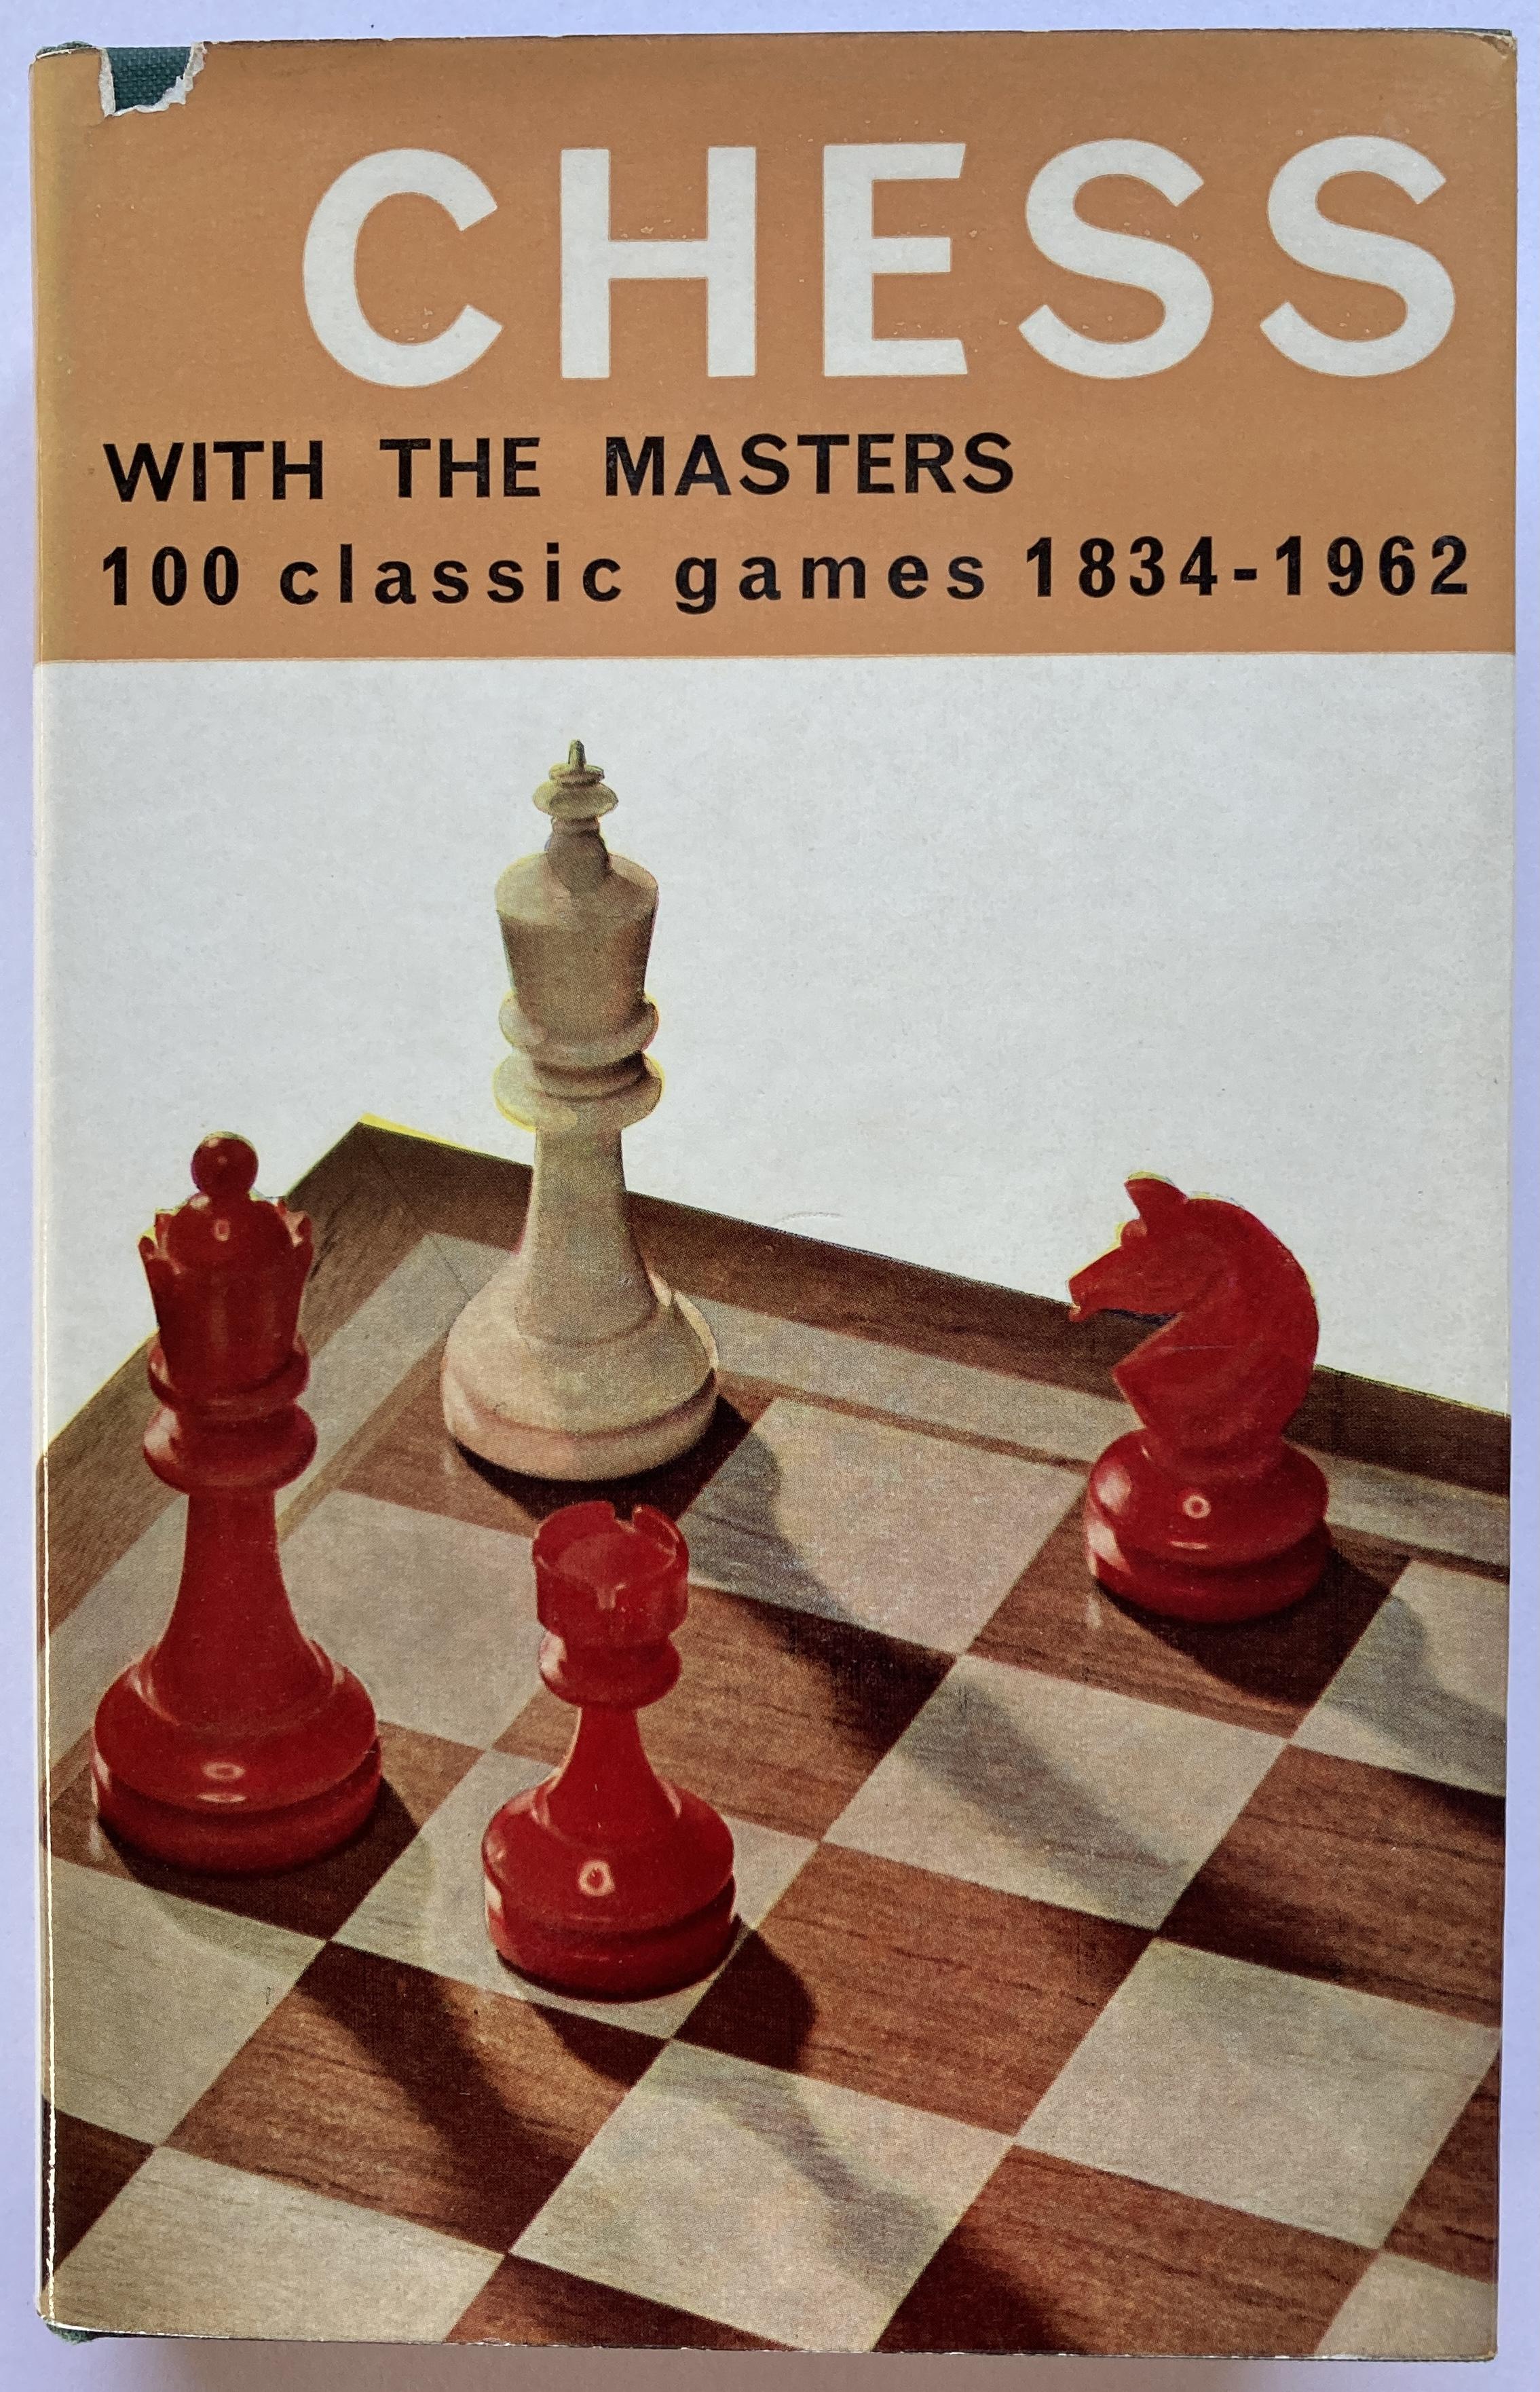 The Immortal Games of Capablanca (Dover Chess): Reinfeld, Fred